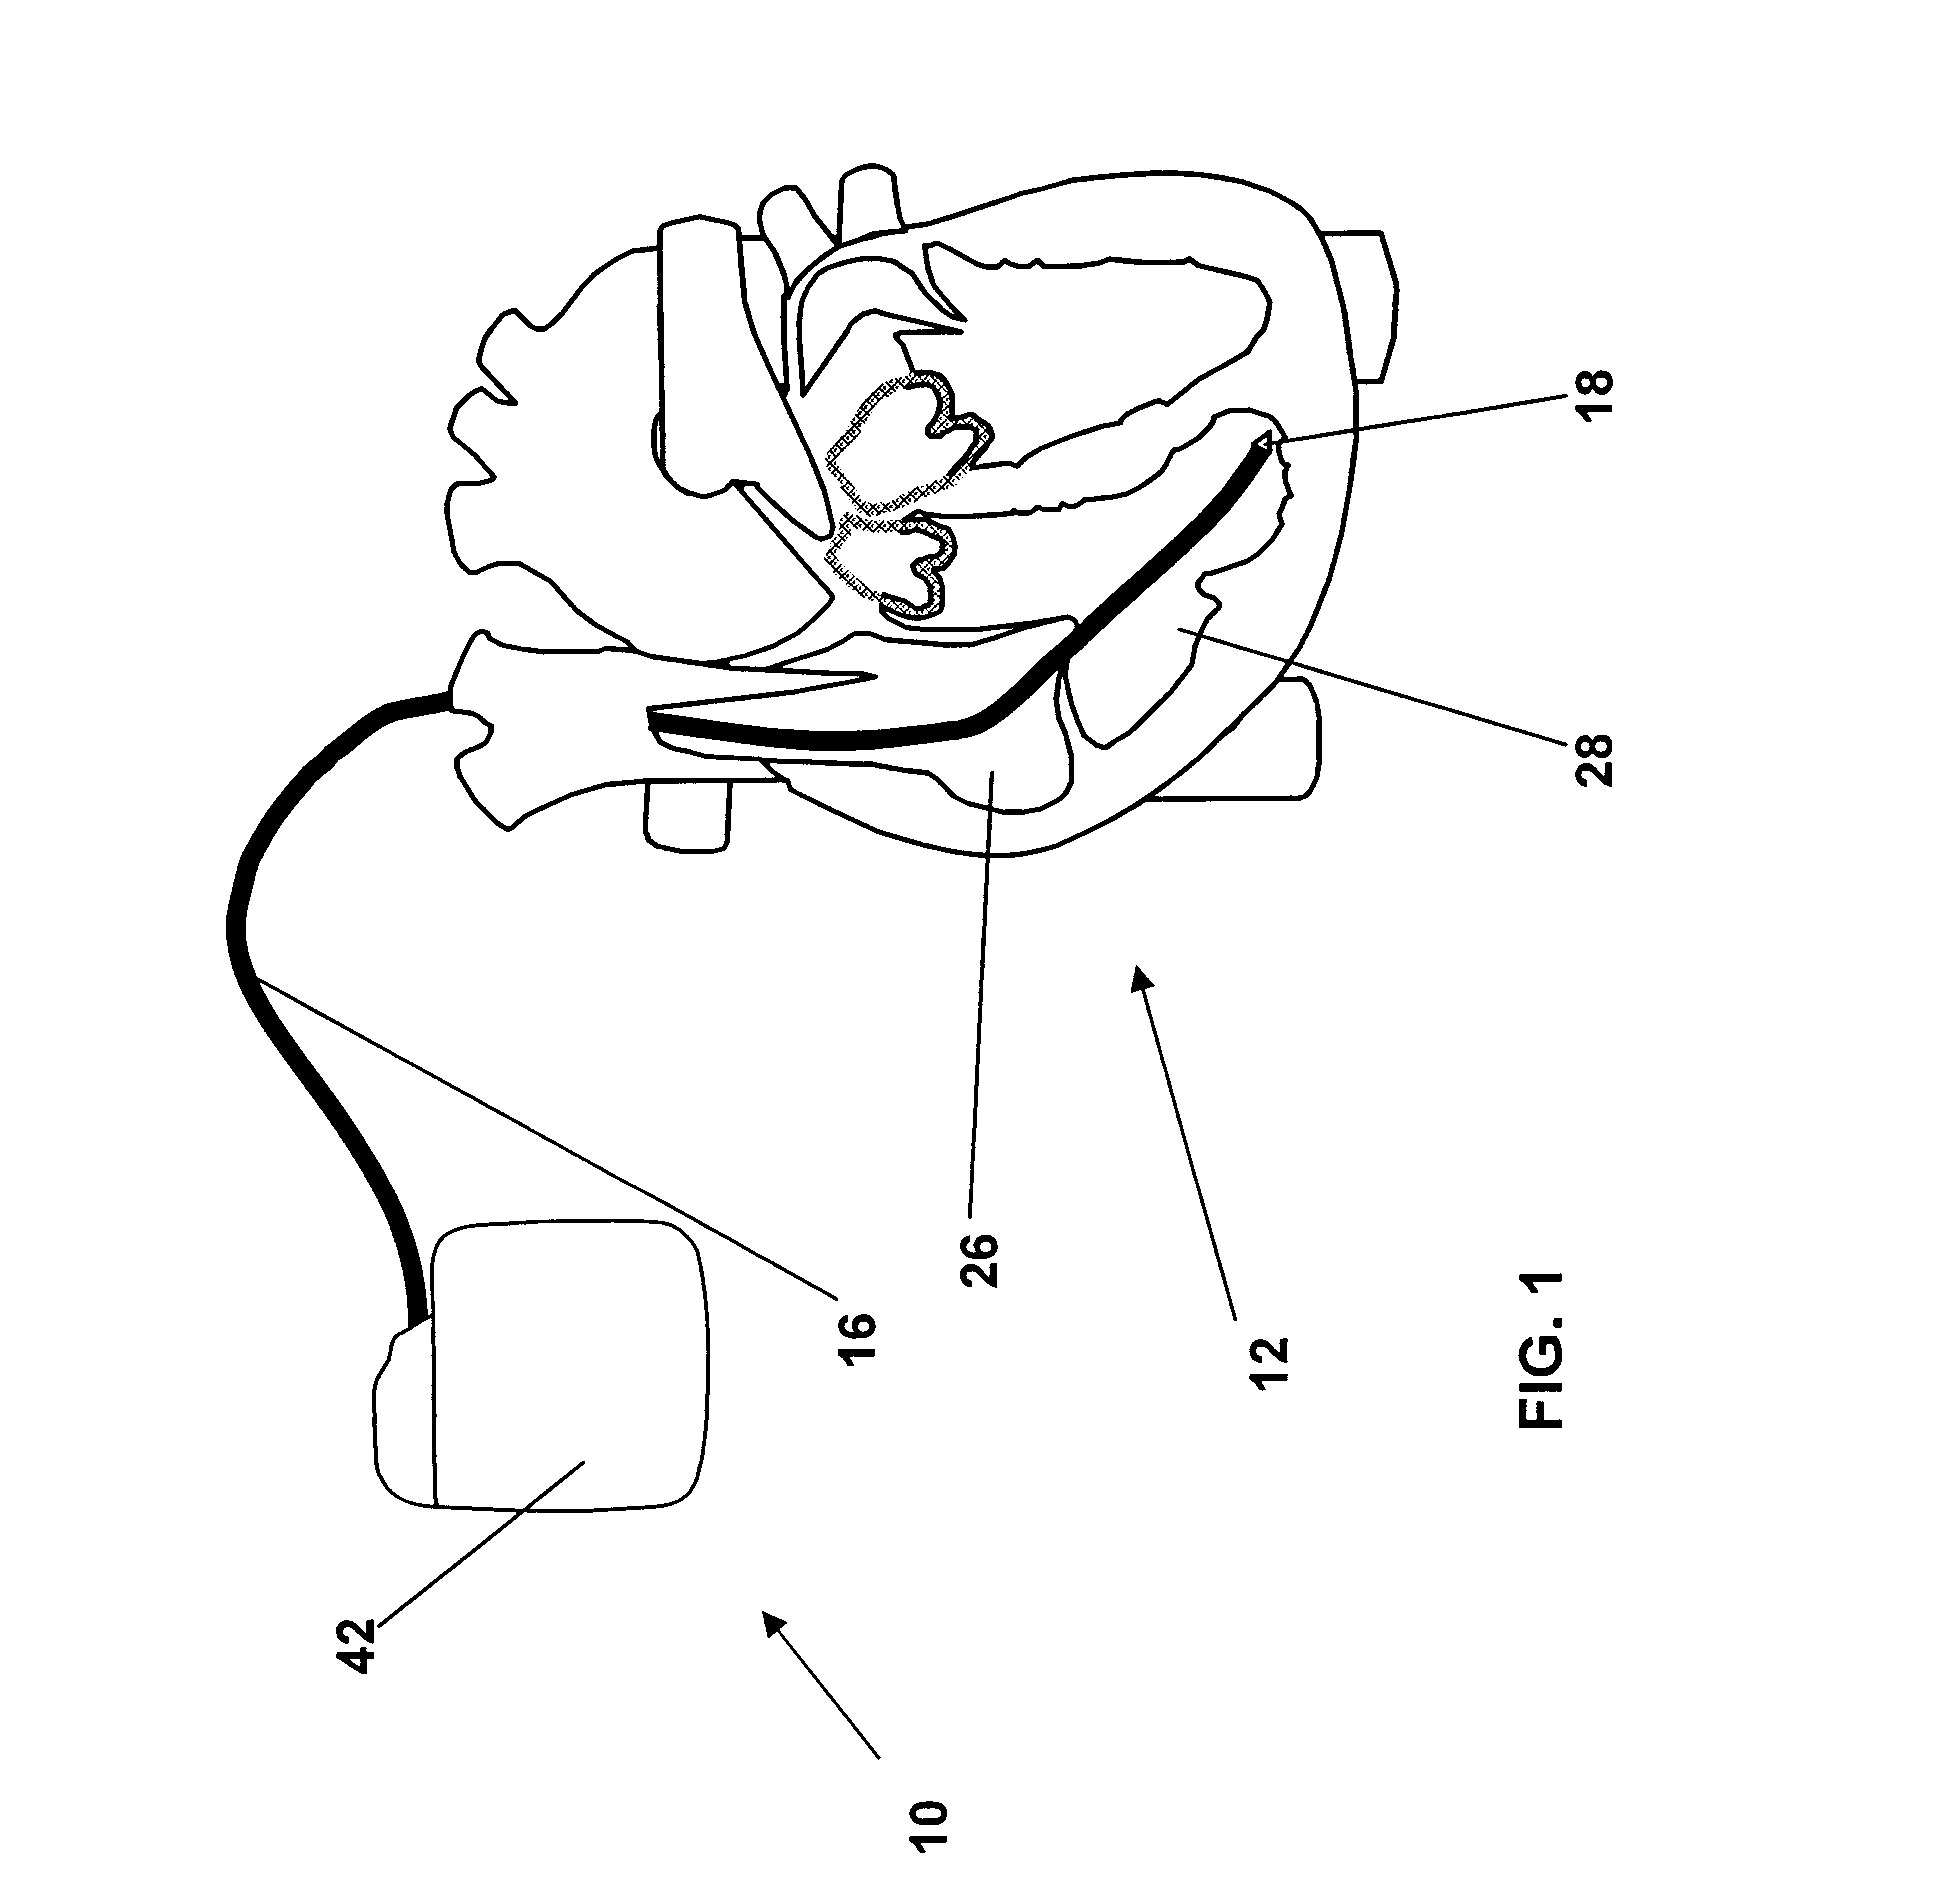 Monitoring system for sleep disordered breathing